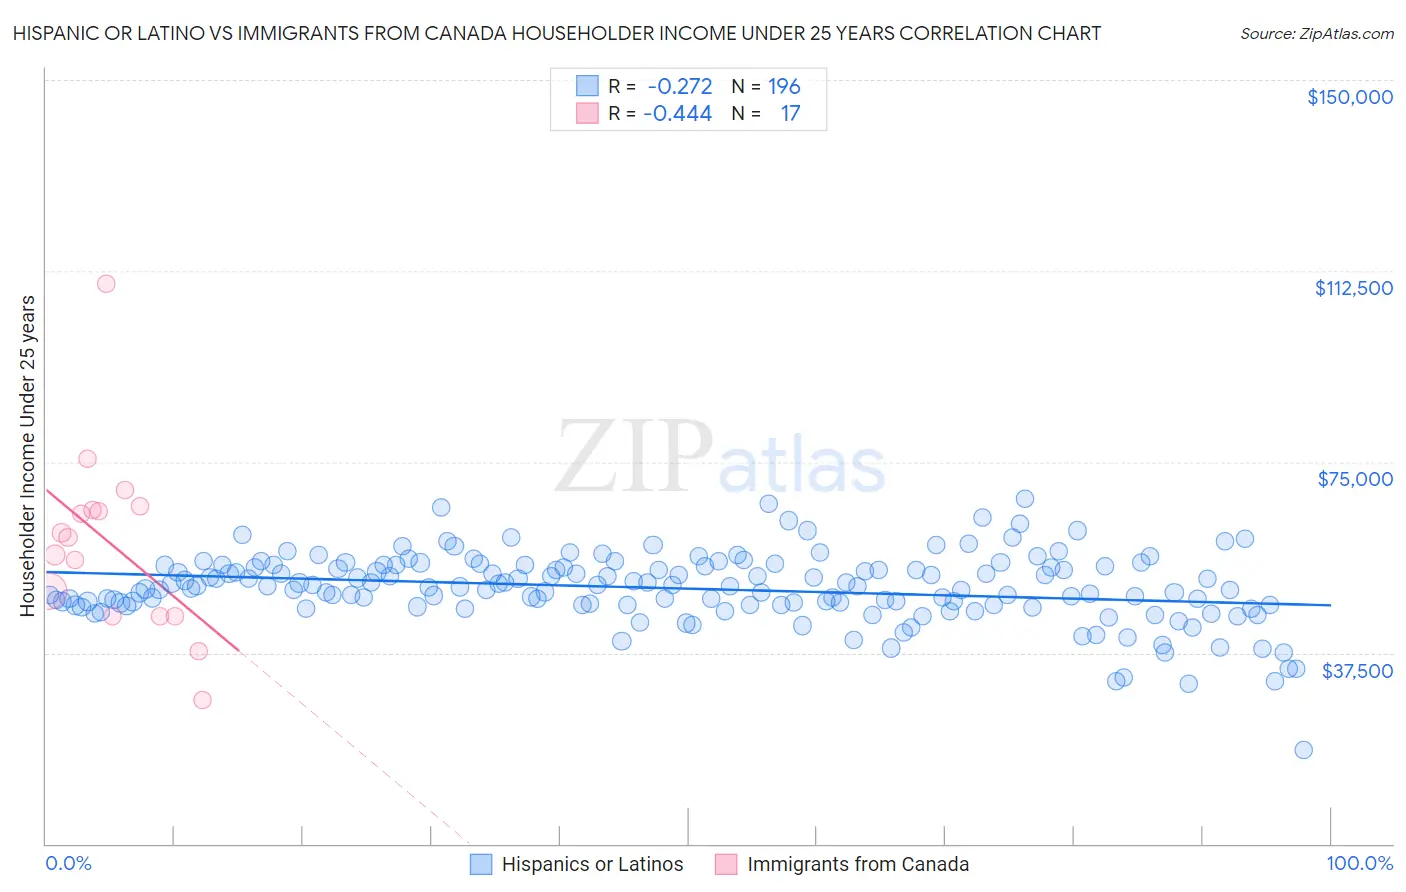 Hispanic or Latino vs Immigrants from Canada Householder Income Under 25 years